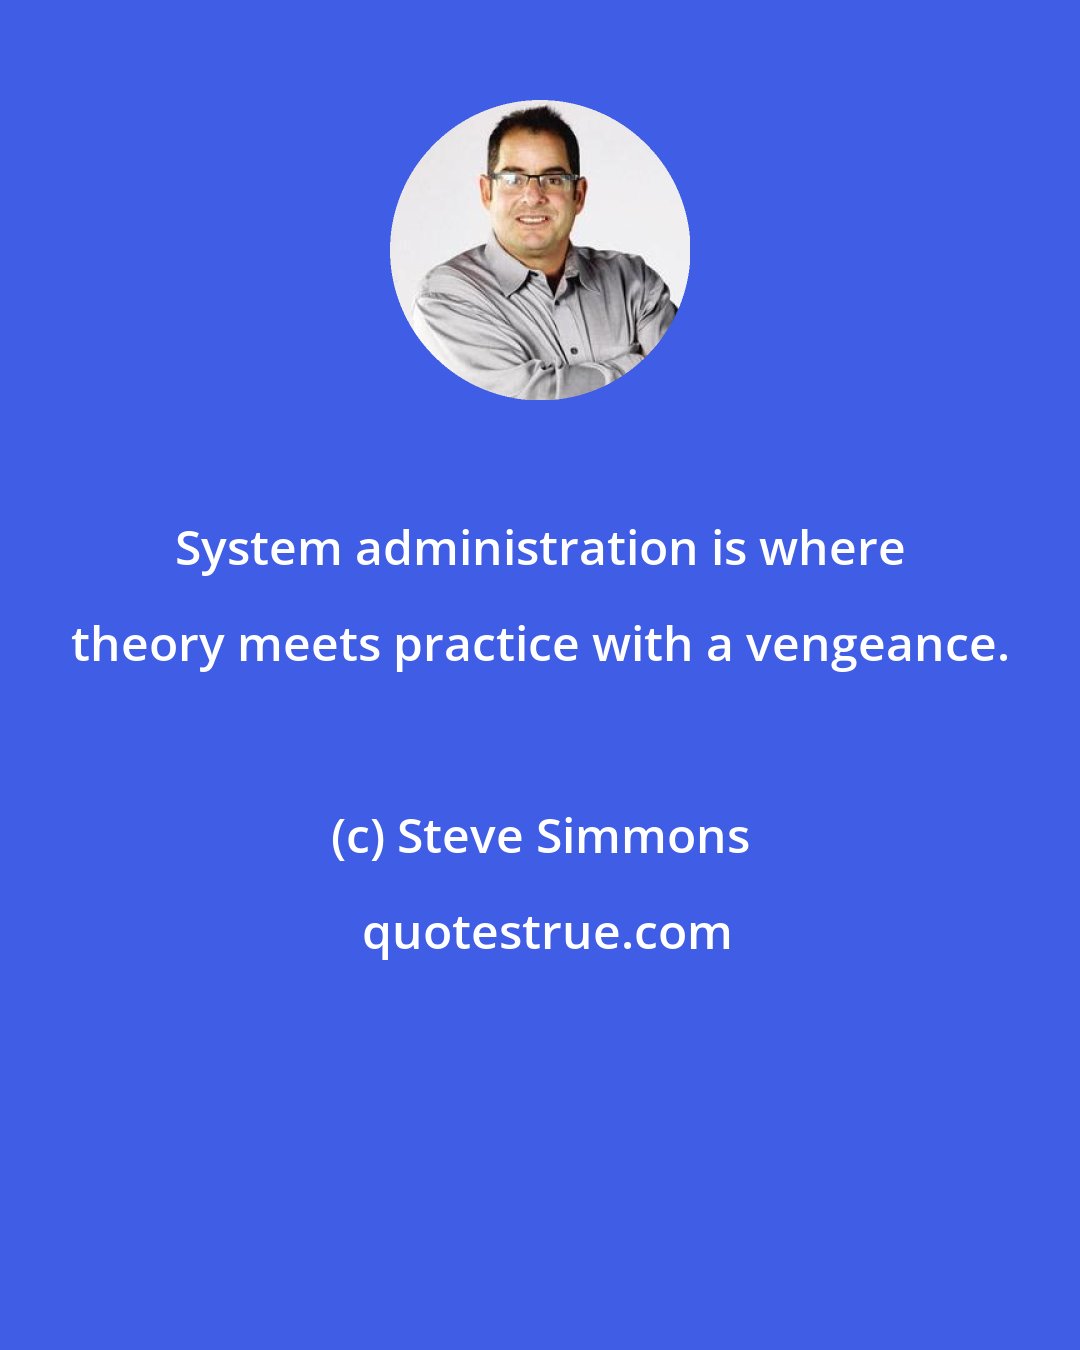 Steve Simmons: System administration is where theory meets practice with a vengeance.